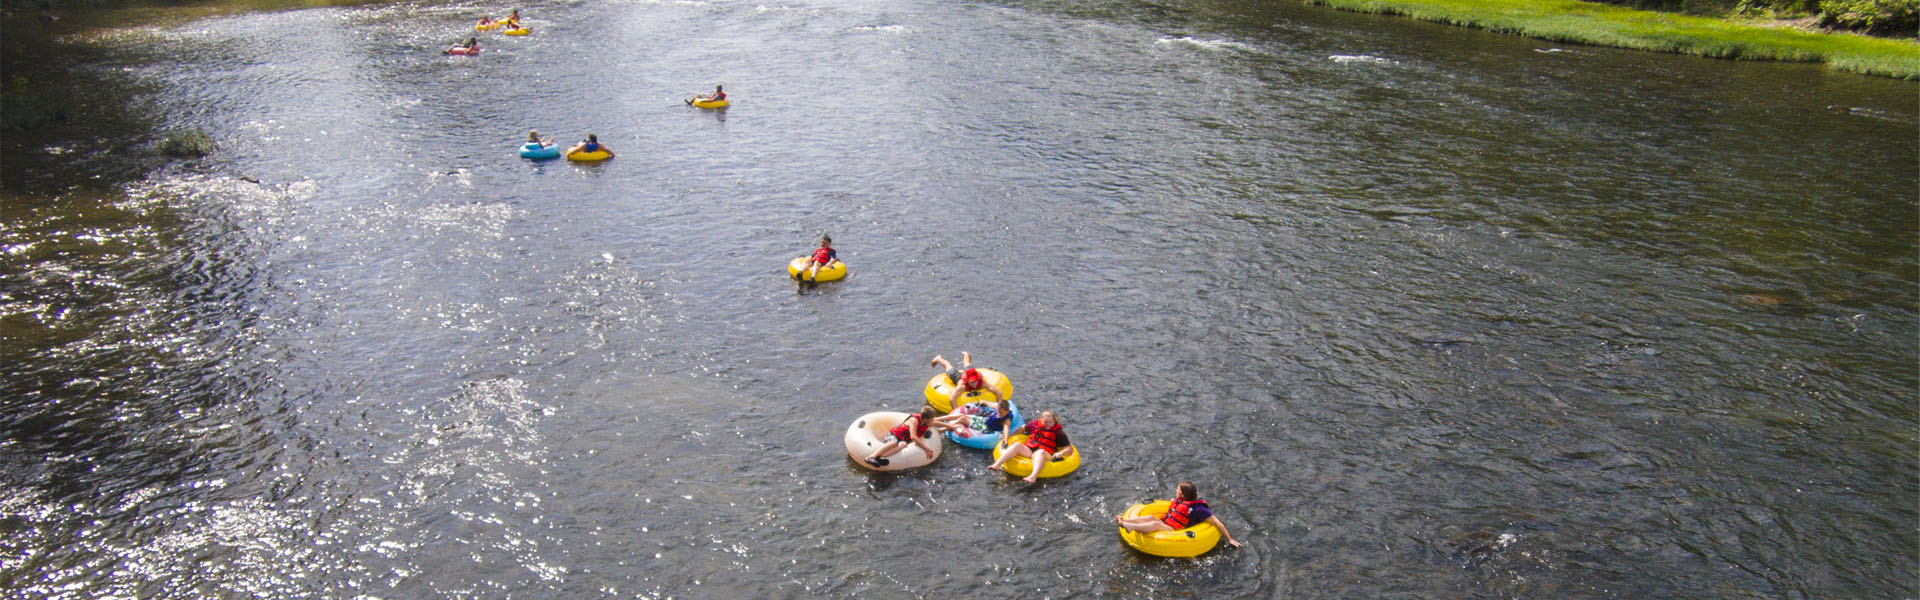 Group tubing along the Upper James River Water Trail